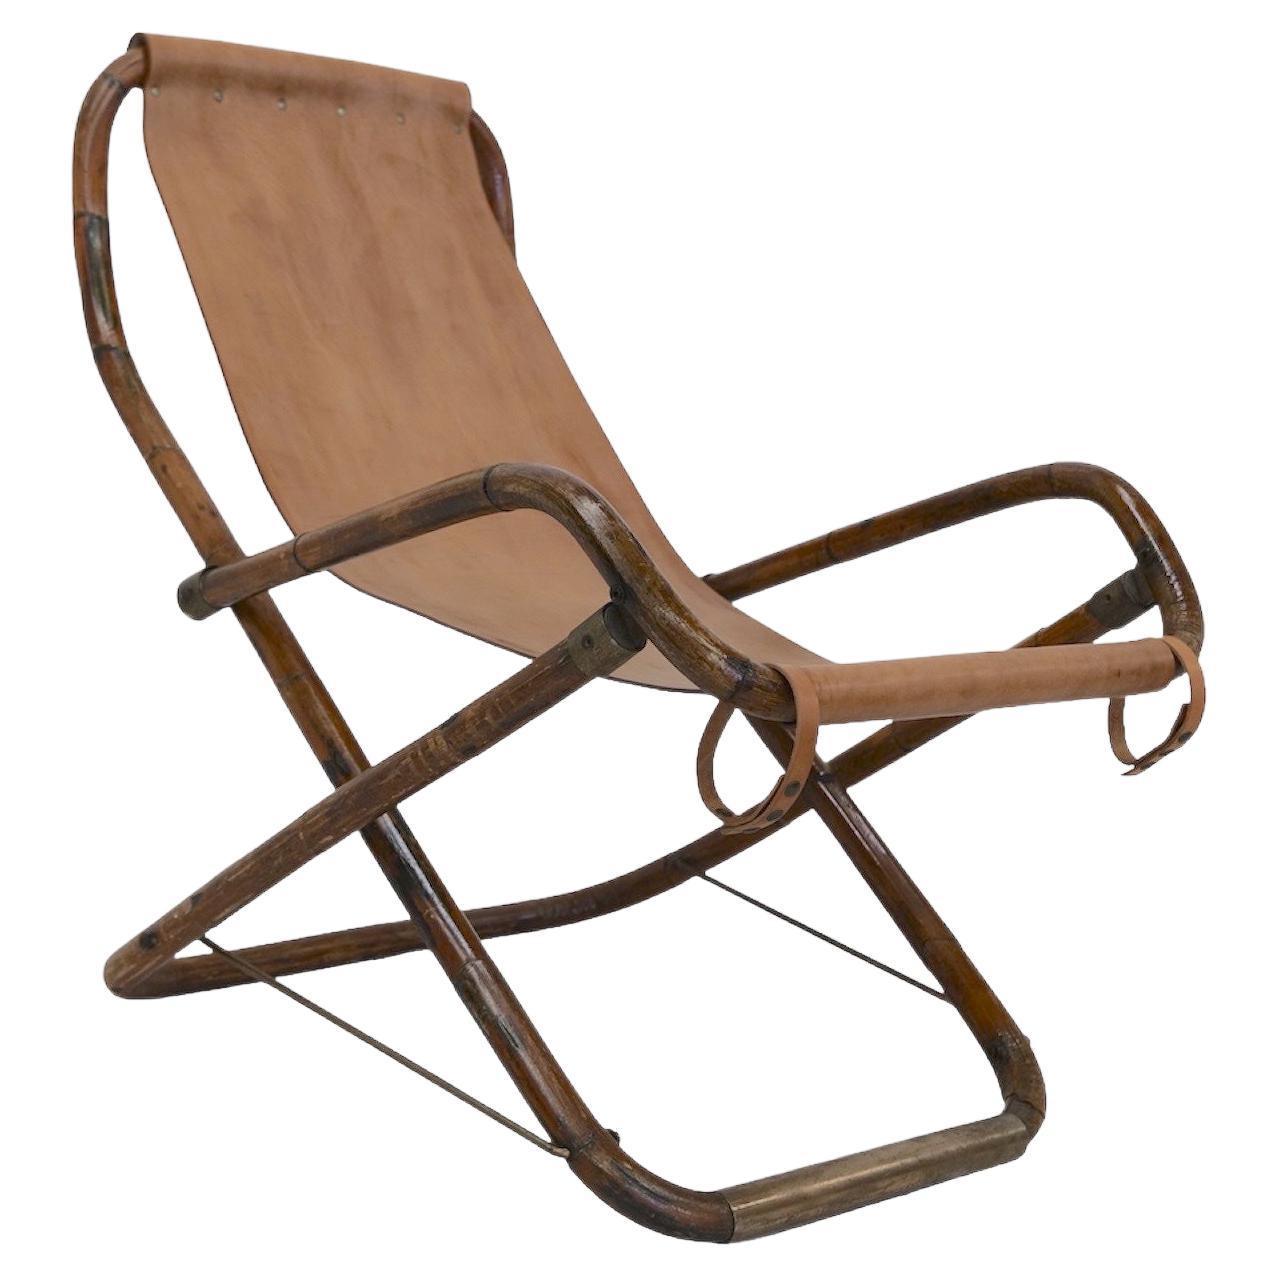 Vintage Italian Leather and Wood Rocking Chair, 1960s For Sale